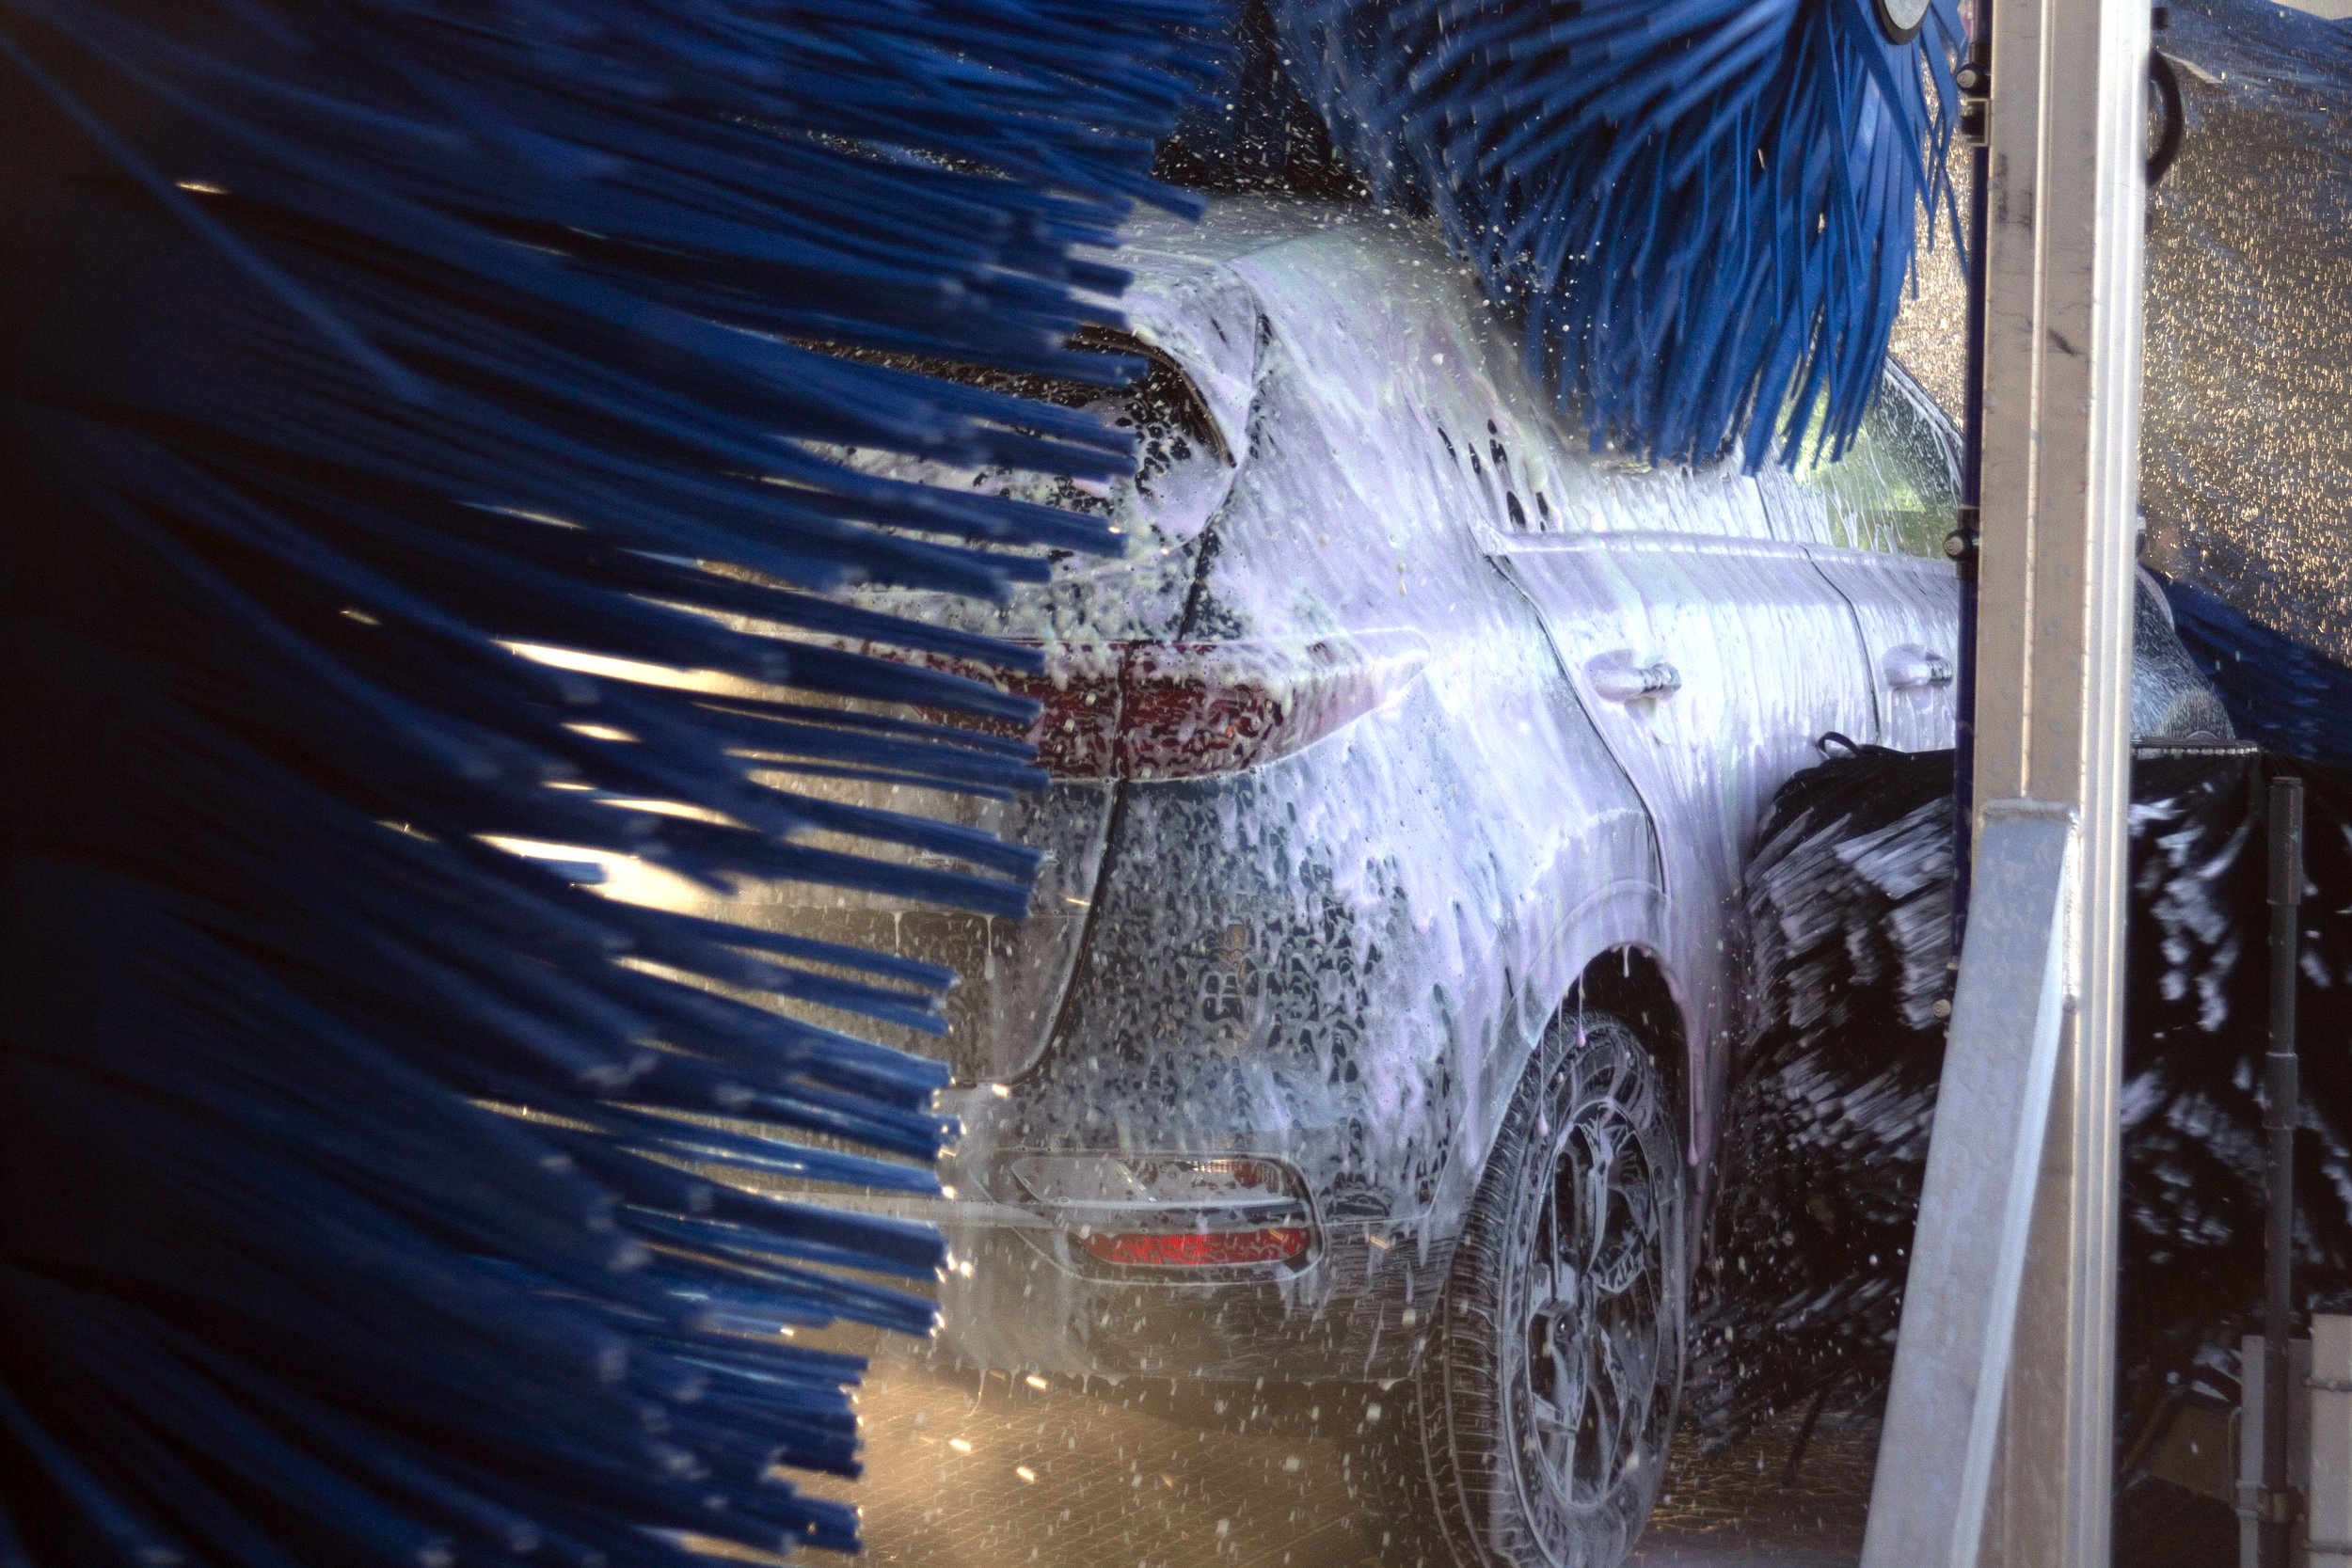 Best and Fastest Car Wash in Ohio